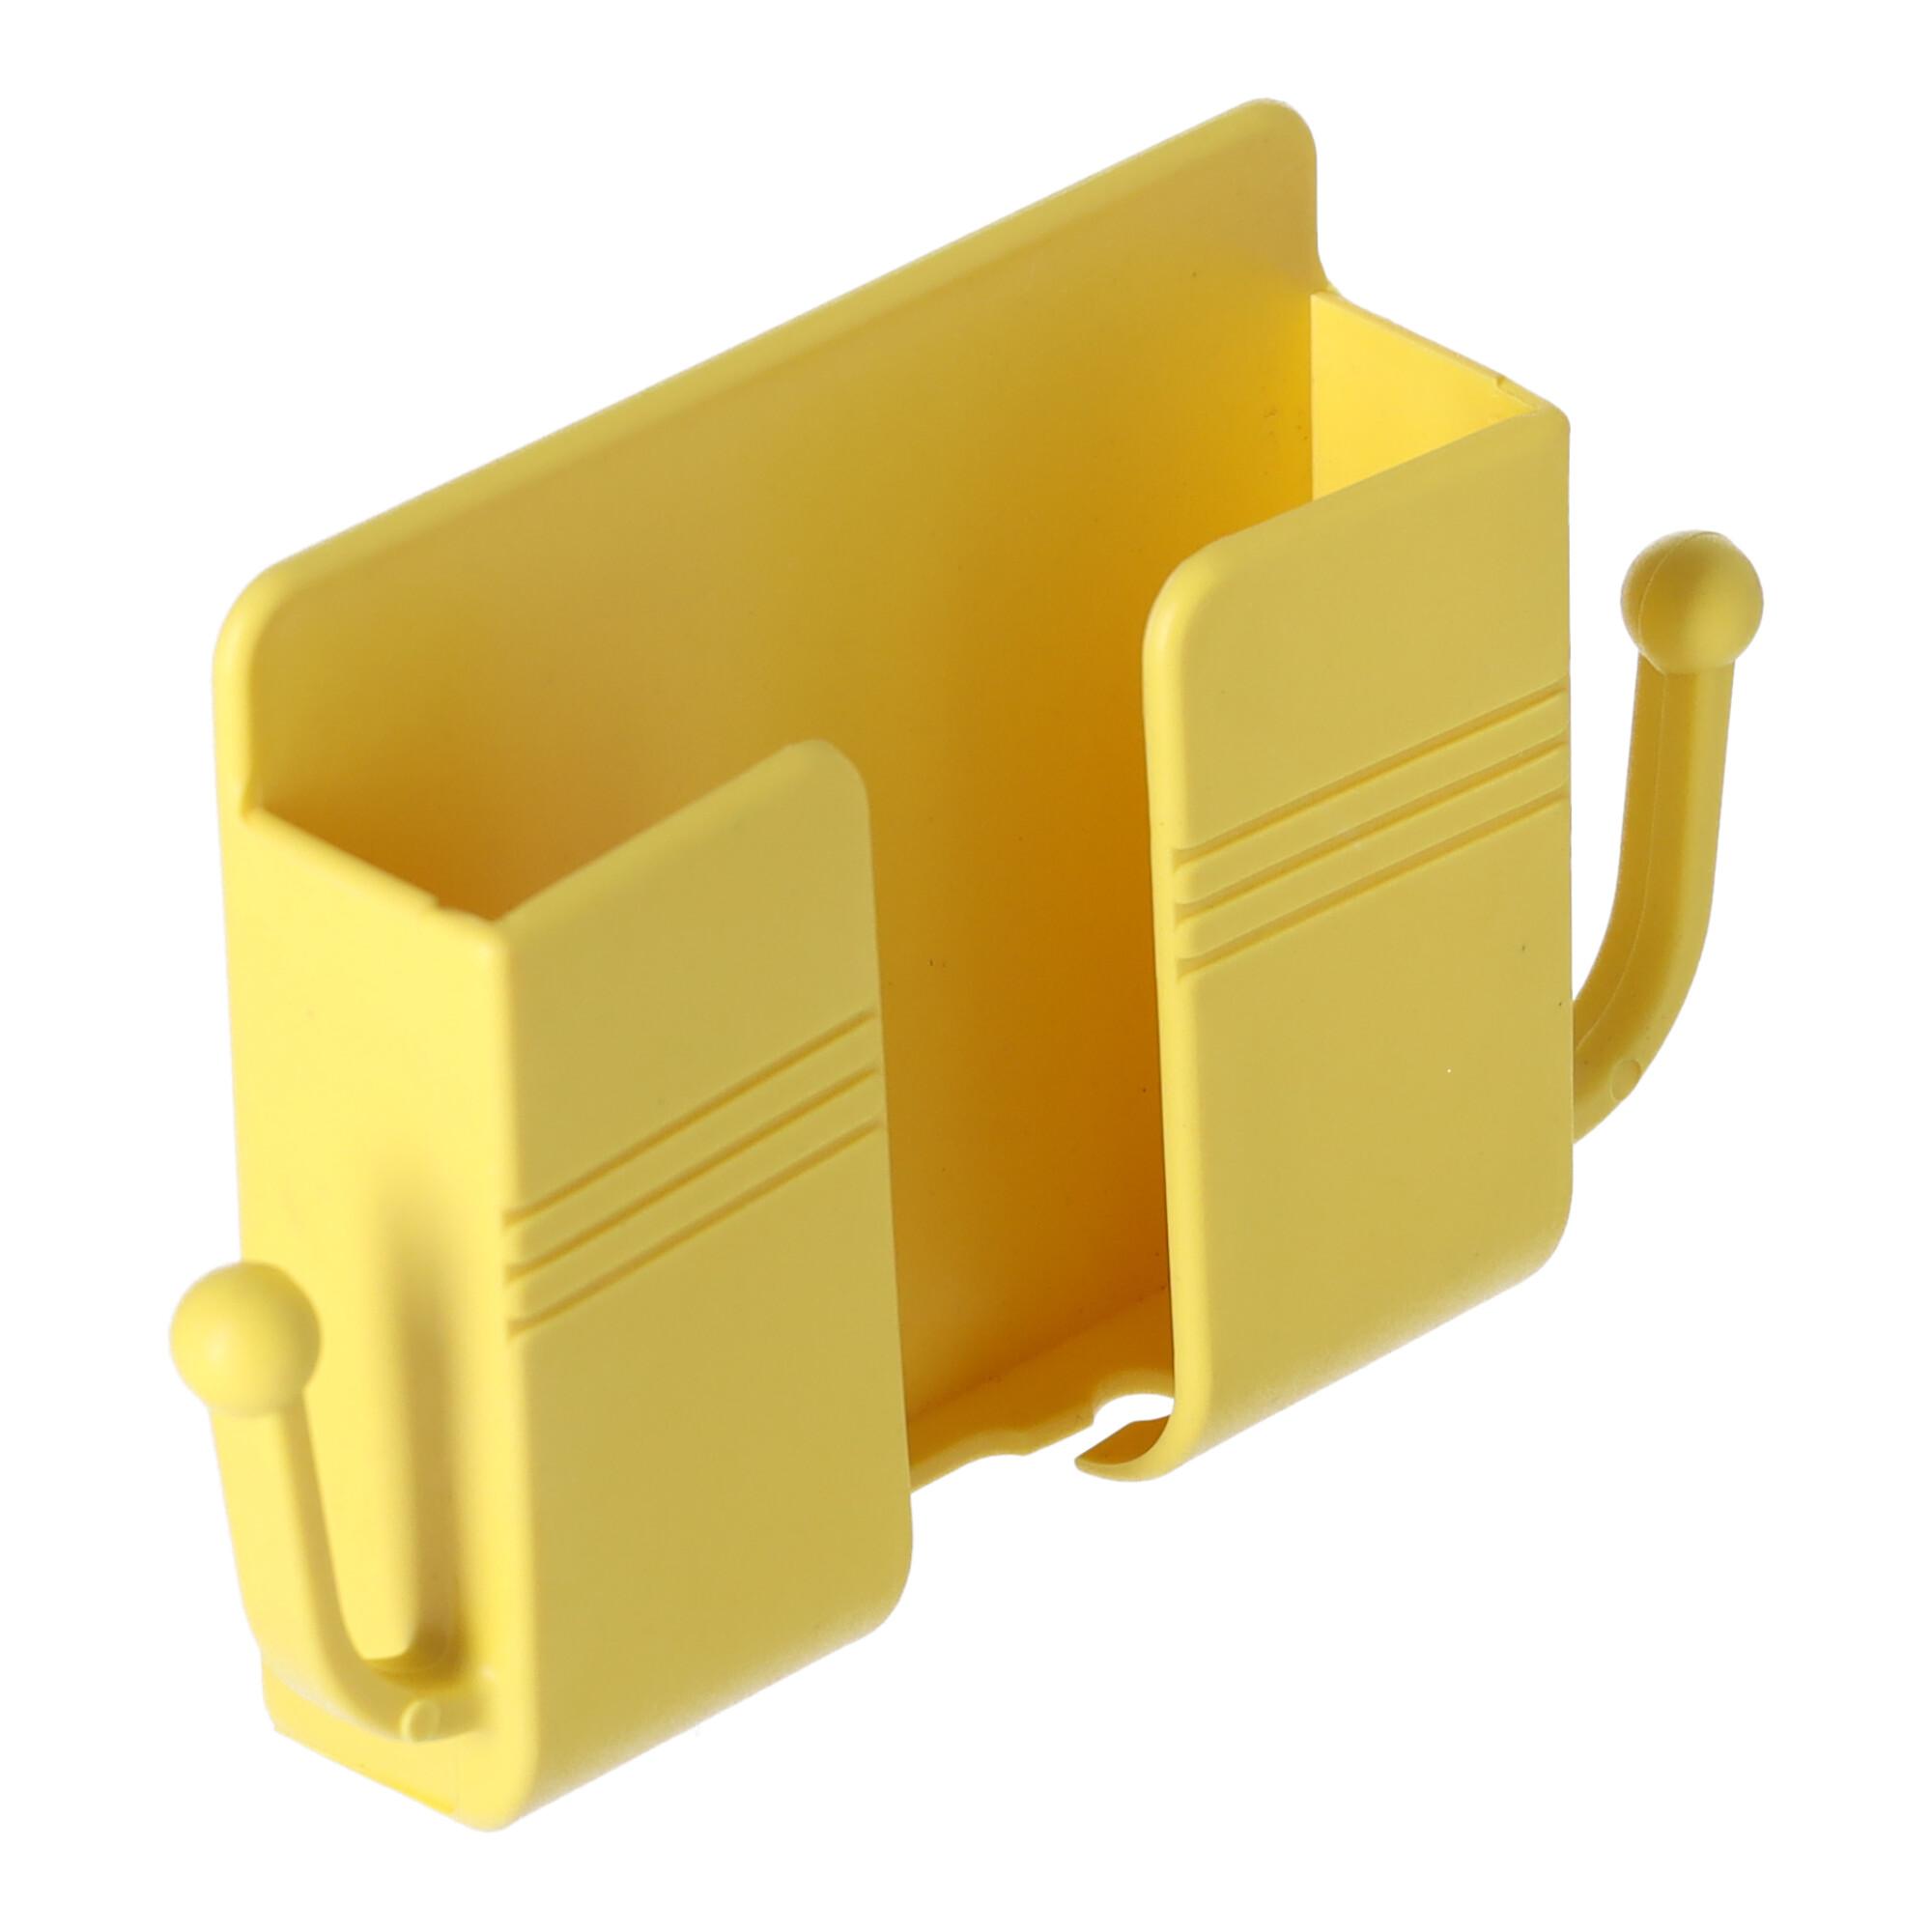 Organizer / wall holder for a mobile phone - yellow